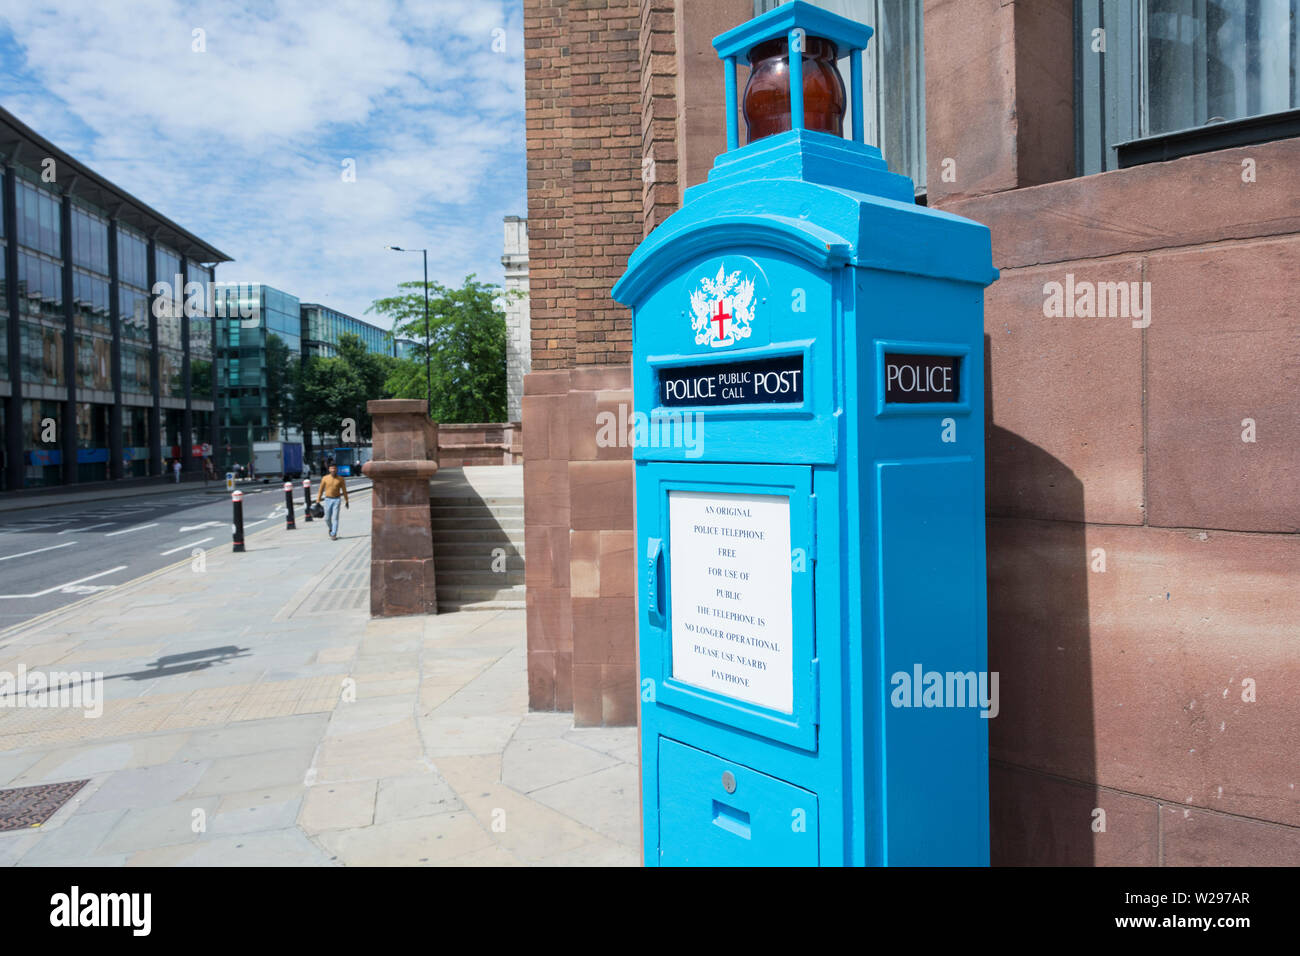 A disused City of London Public blue police call telephone box near in the City of London England, UK Stock Photo